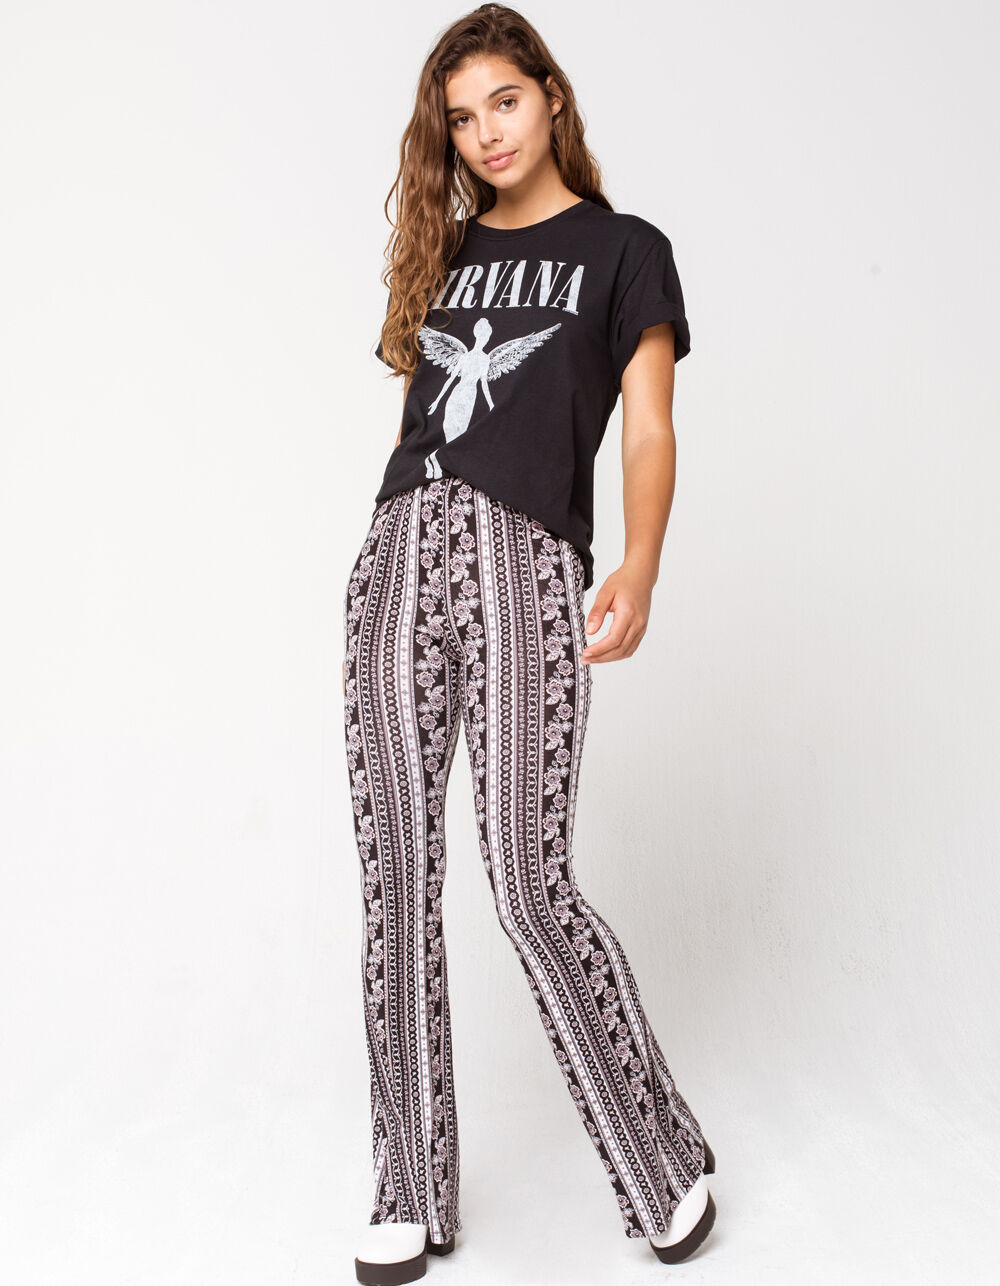 IVY & MAIN Floral Flare Womens Pants - BLACK COMBO | Tillys